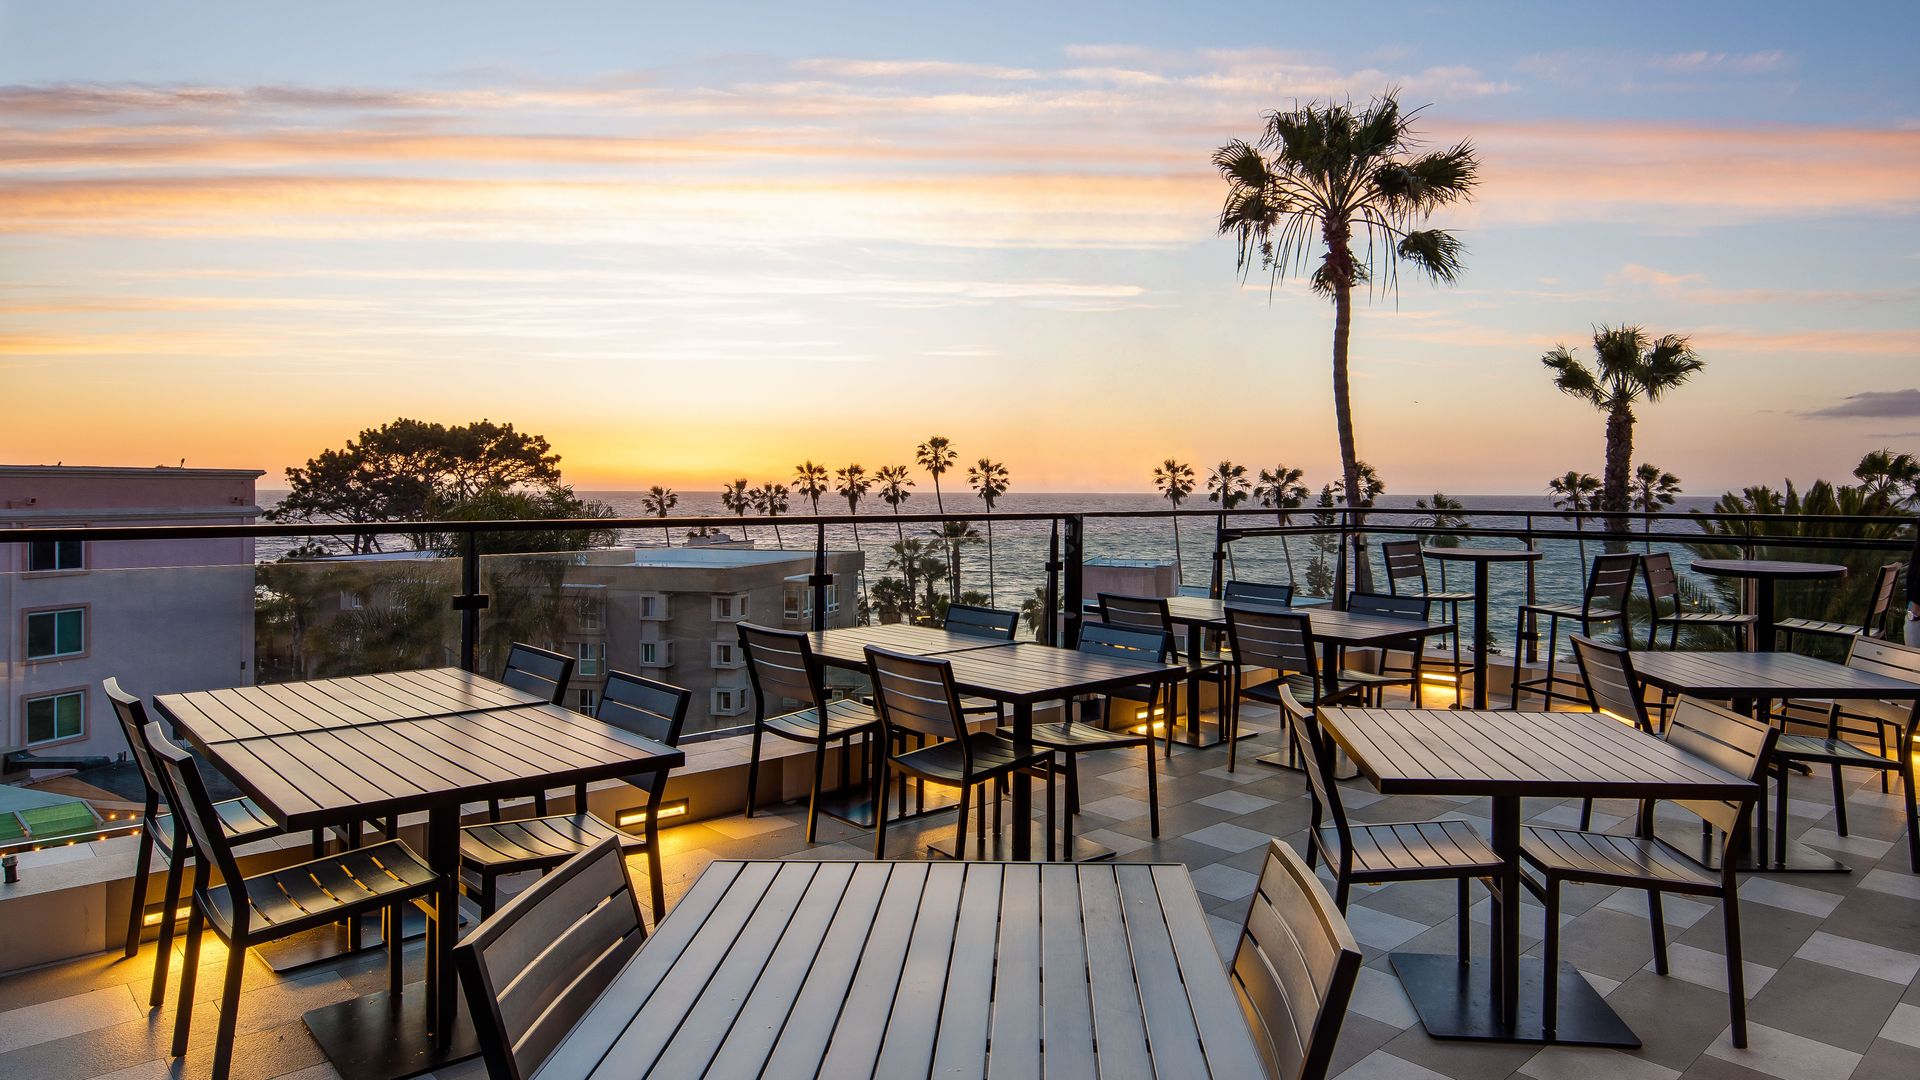 Tables at a rooftop bar with a pink and blue sunset over the ocean and palm trees in the background.